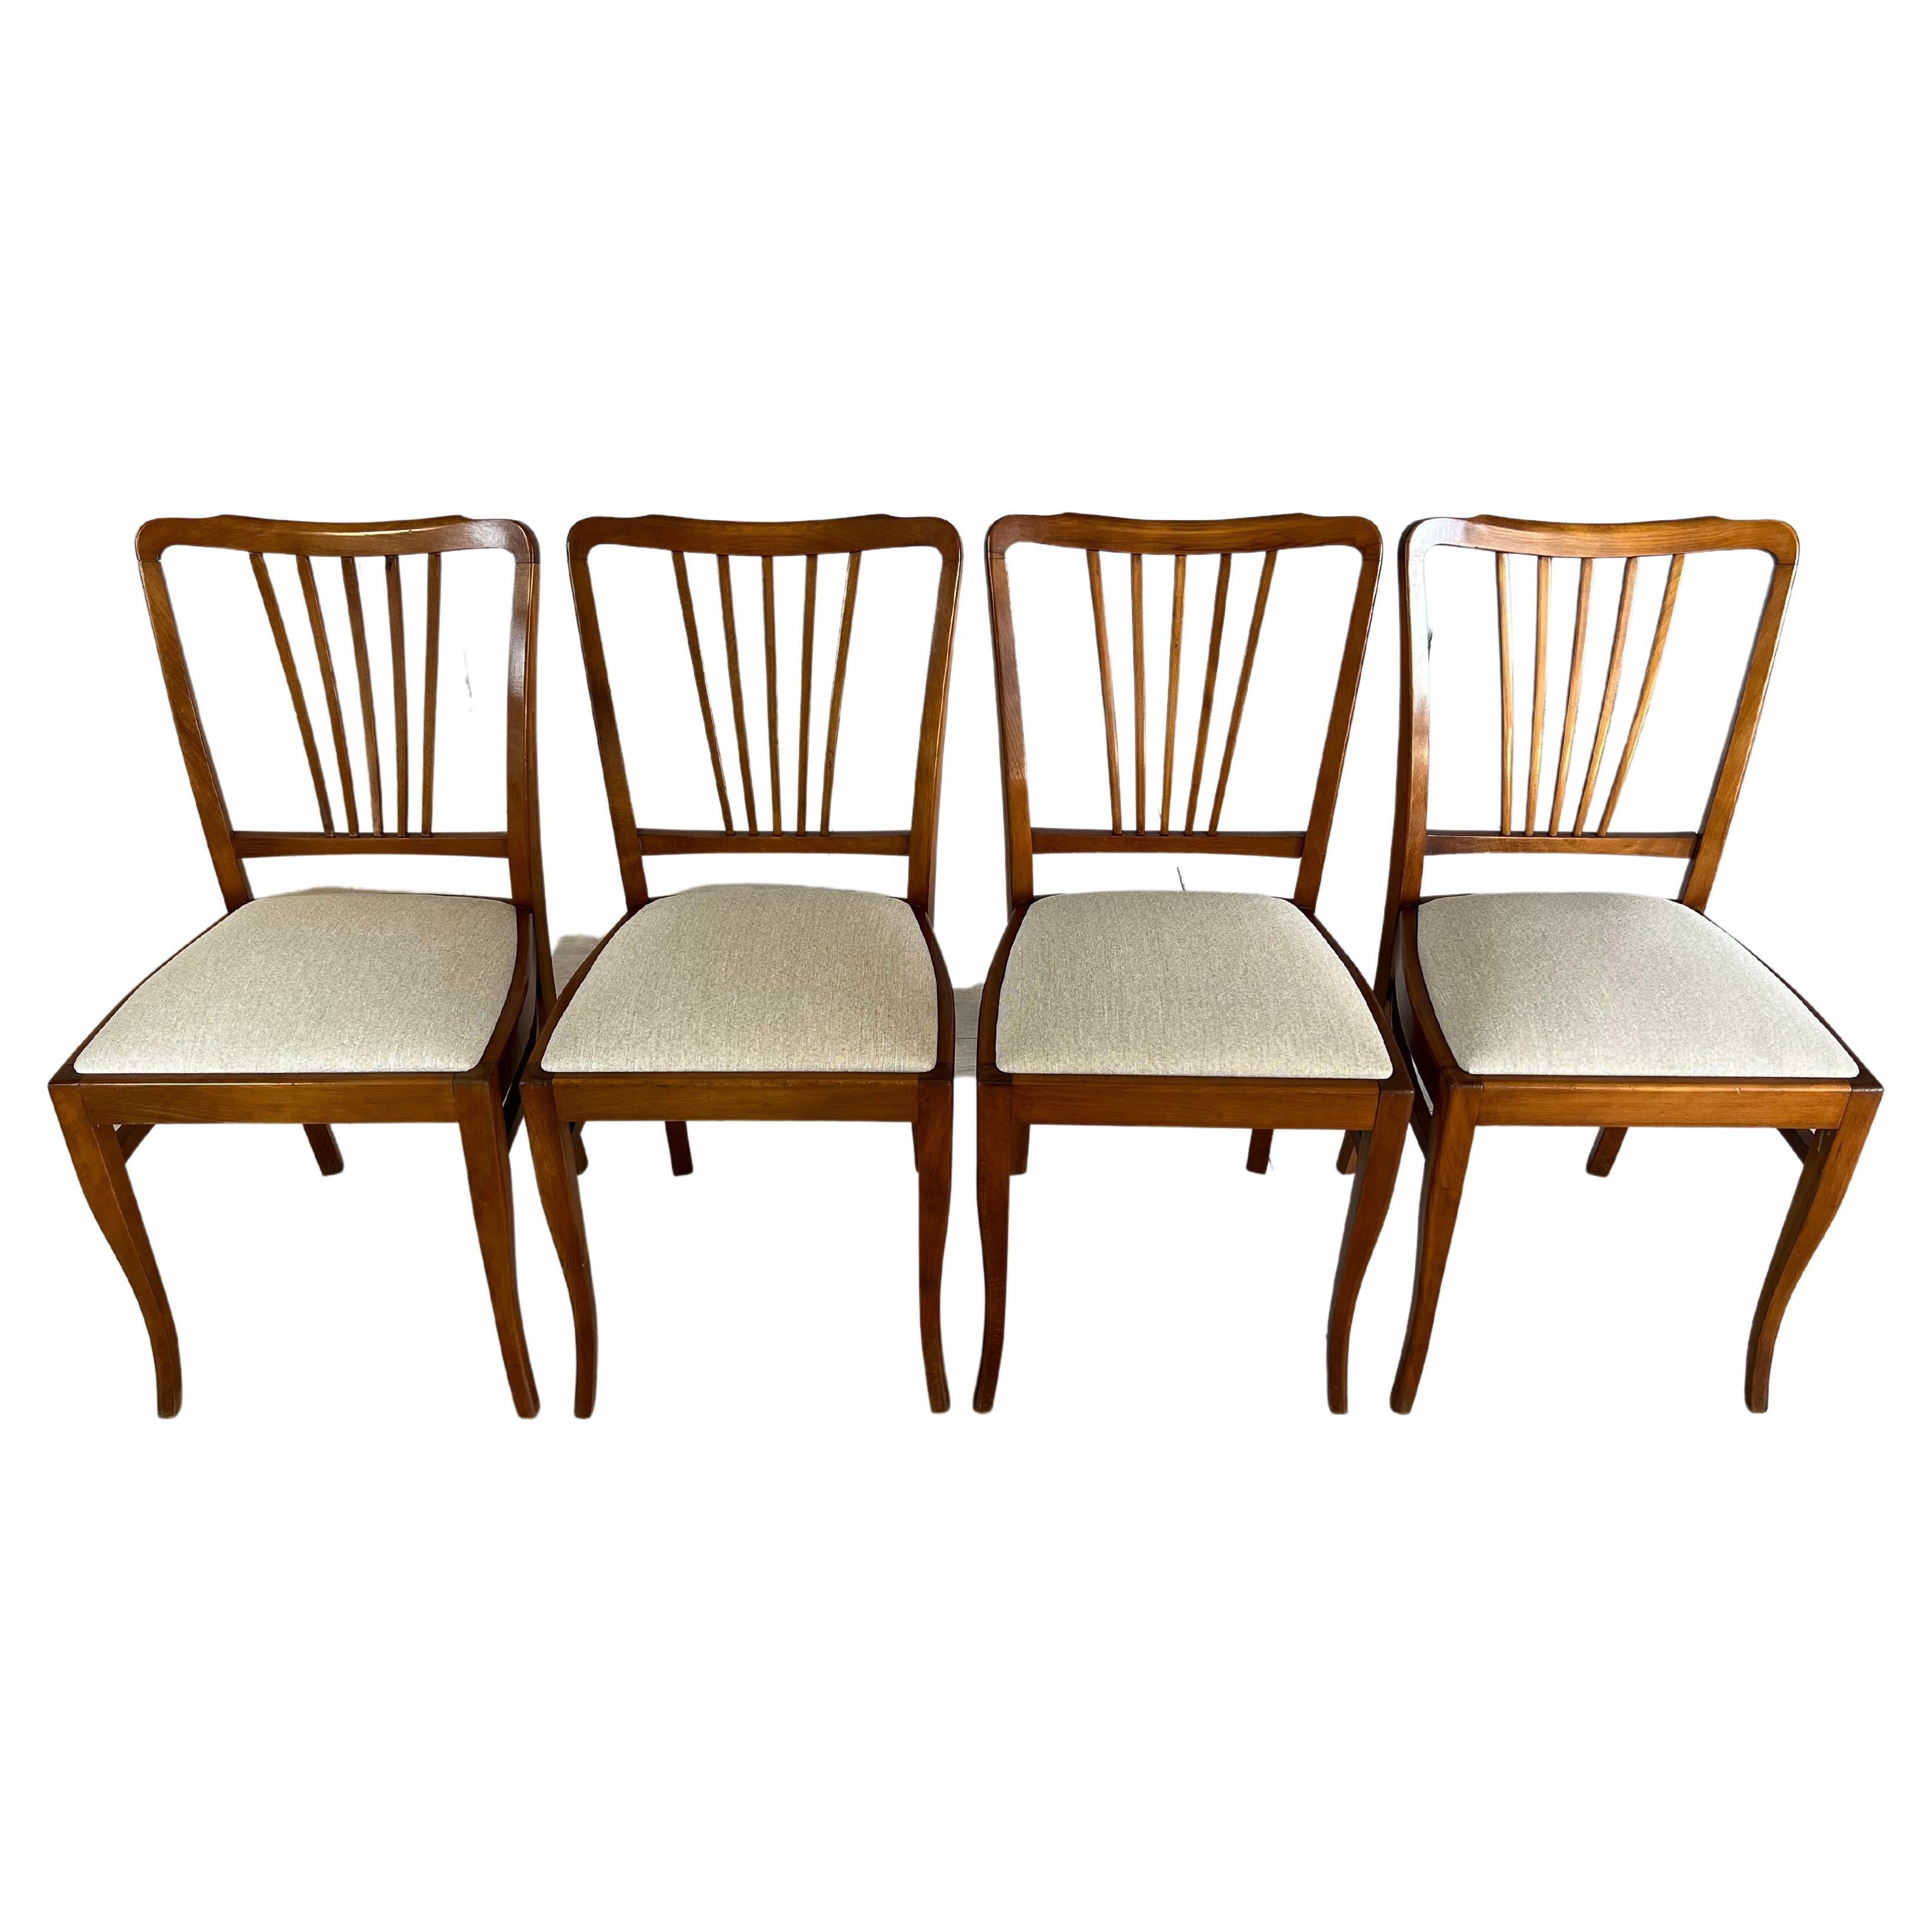 French Country Splat Back Dining Chairs, Reupholstered - Set of 4 For Sale